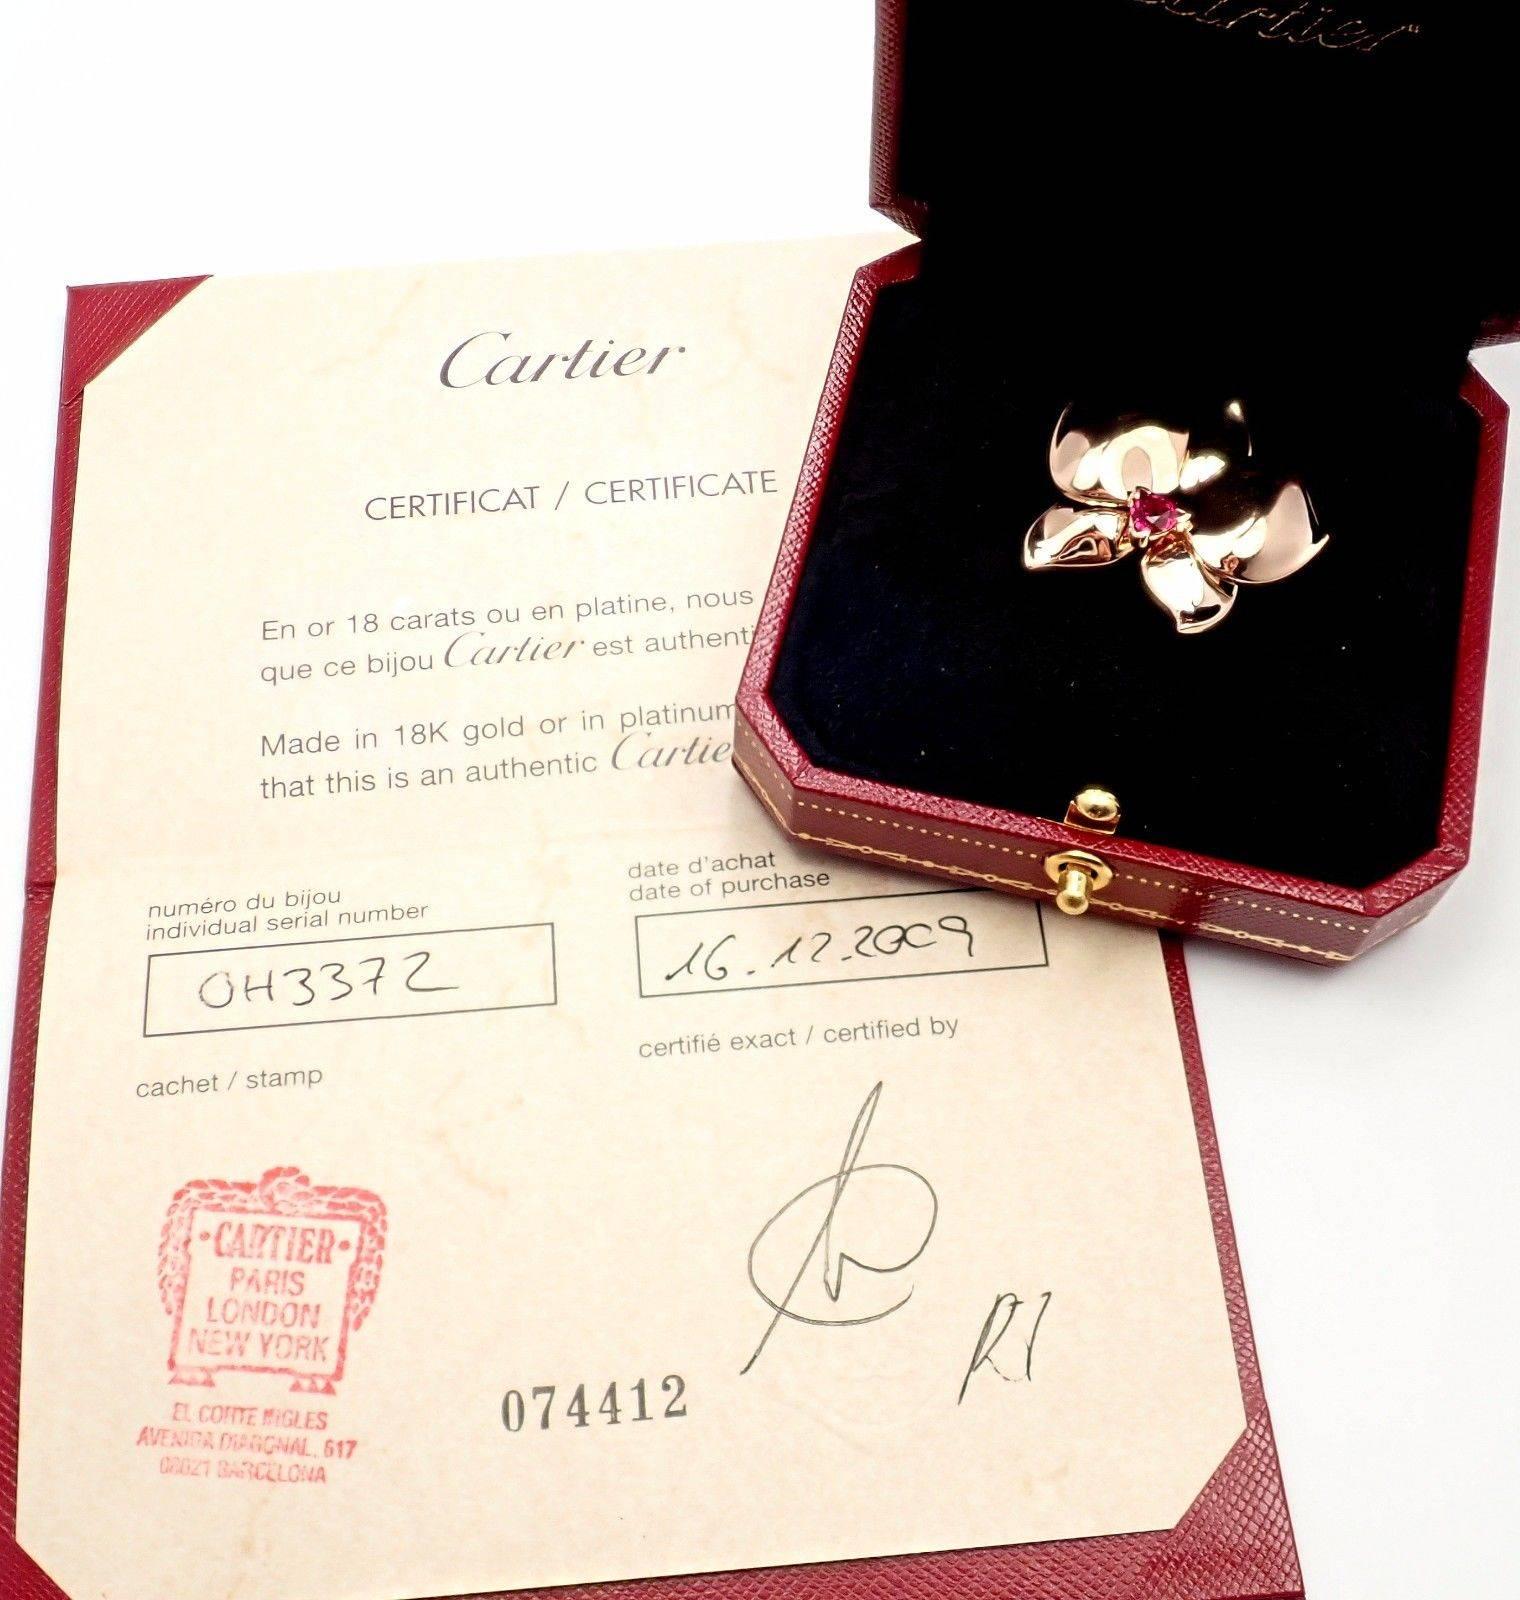 18k Rose Gold Pink Sapphire Caresse D'orchidées Orchid Flower Ring by Cartier.
With Triangle shape pink sapphire 6mm x 5mm
This ring comes with original Cartier box and Cartier certificate.
Details:
Size: 6 3/4 US, Europe 54
Weight: 19.1